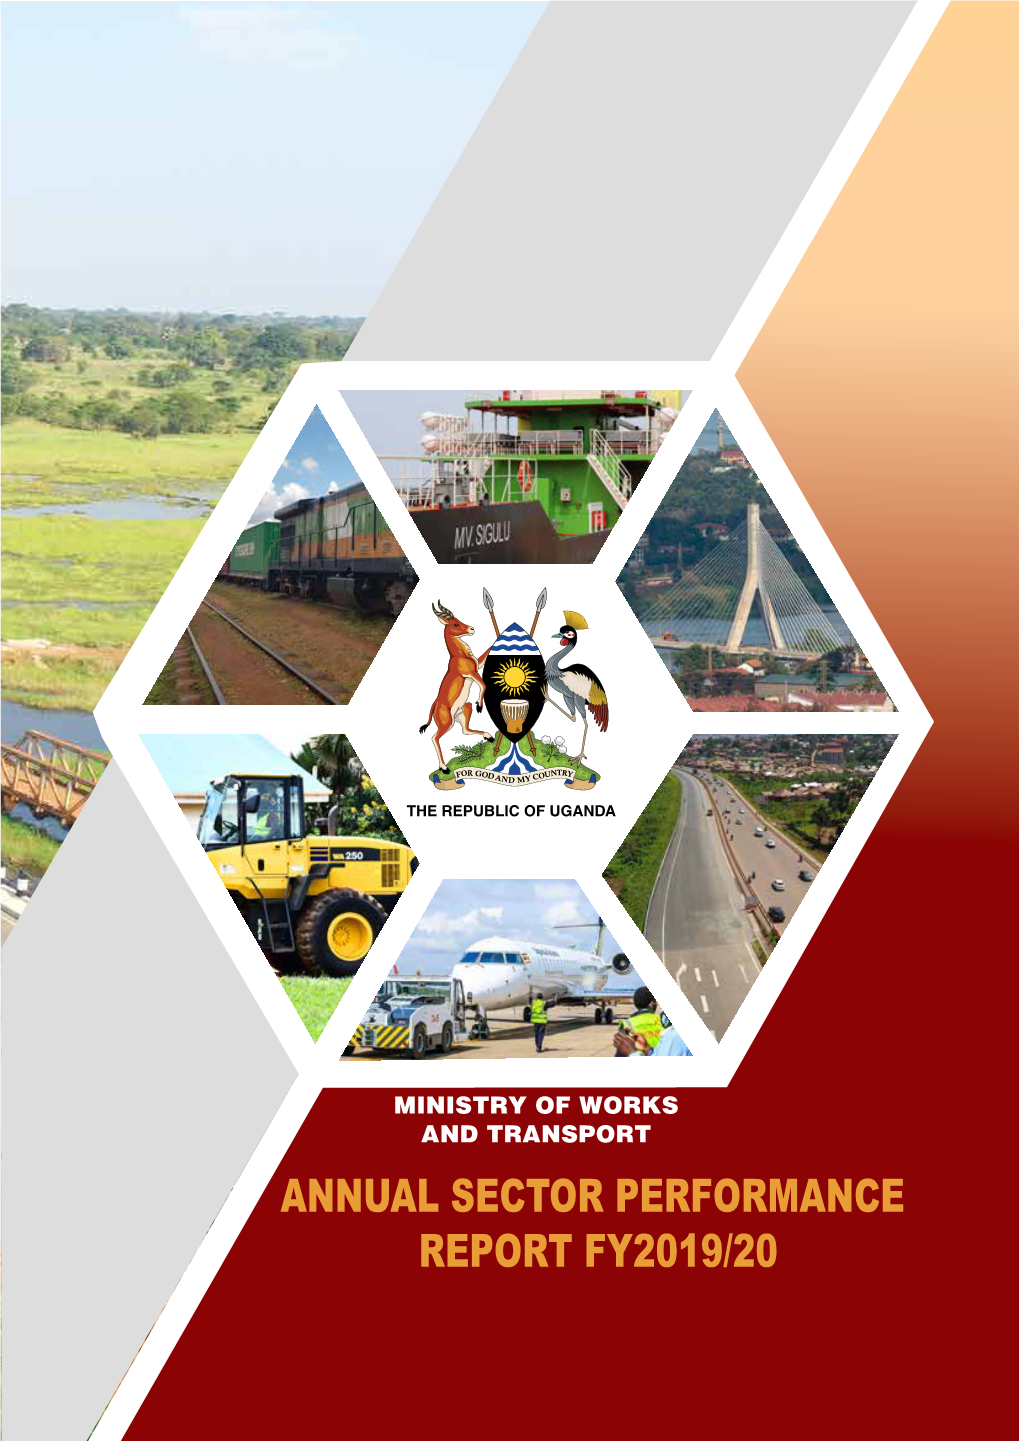 Annual Sector Performance Report Fy2019/20